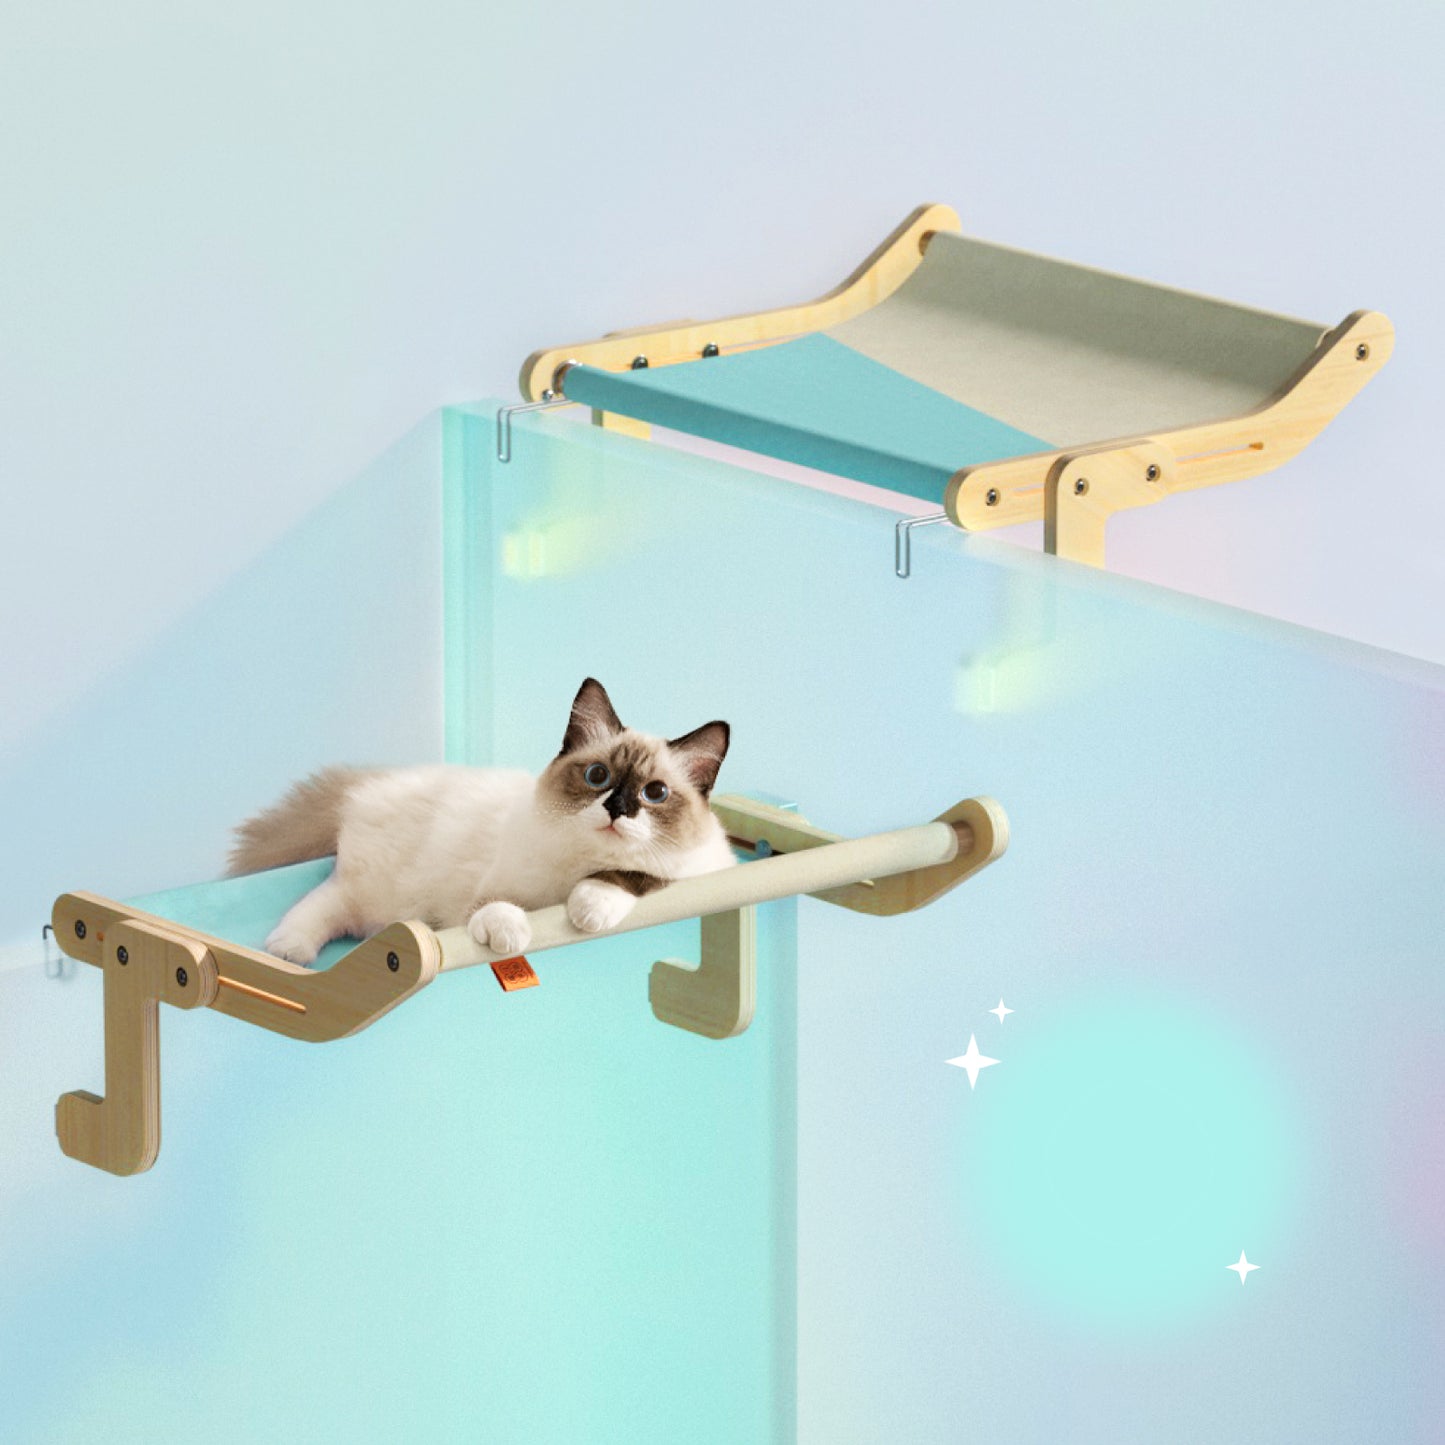 Mewoofun Pet Cat Window Perch 4 Color Wooden Assembly Hanging Bed